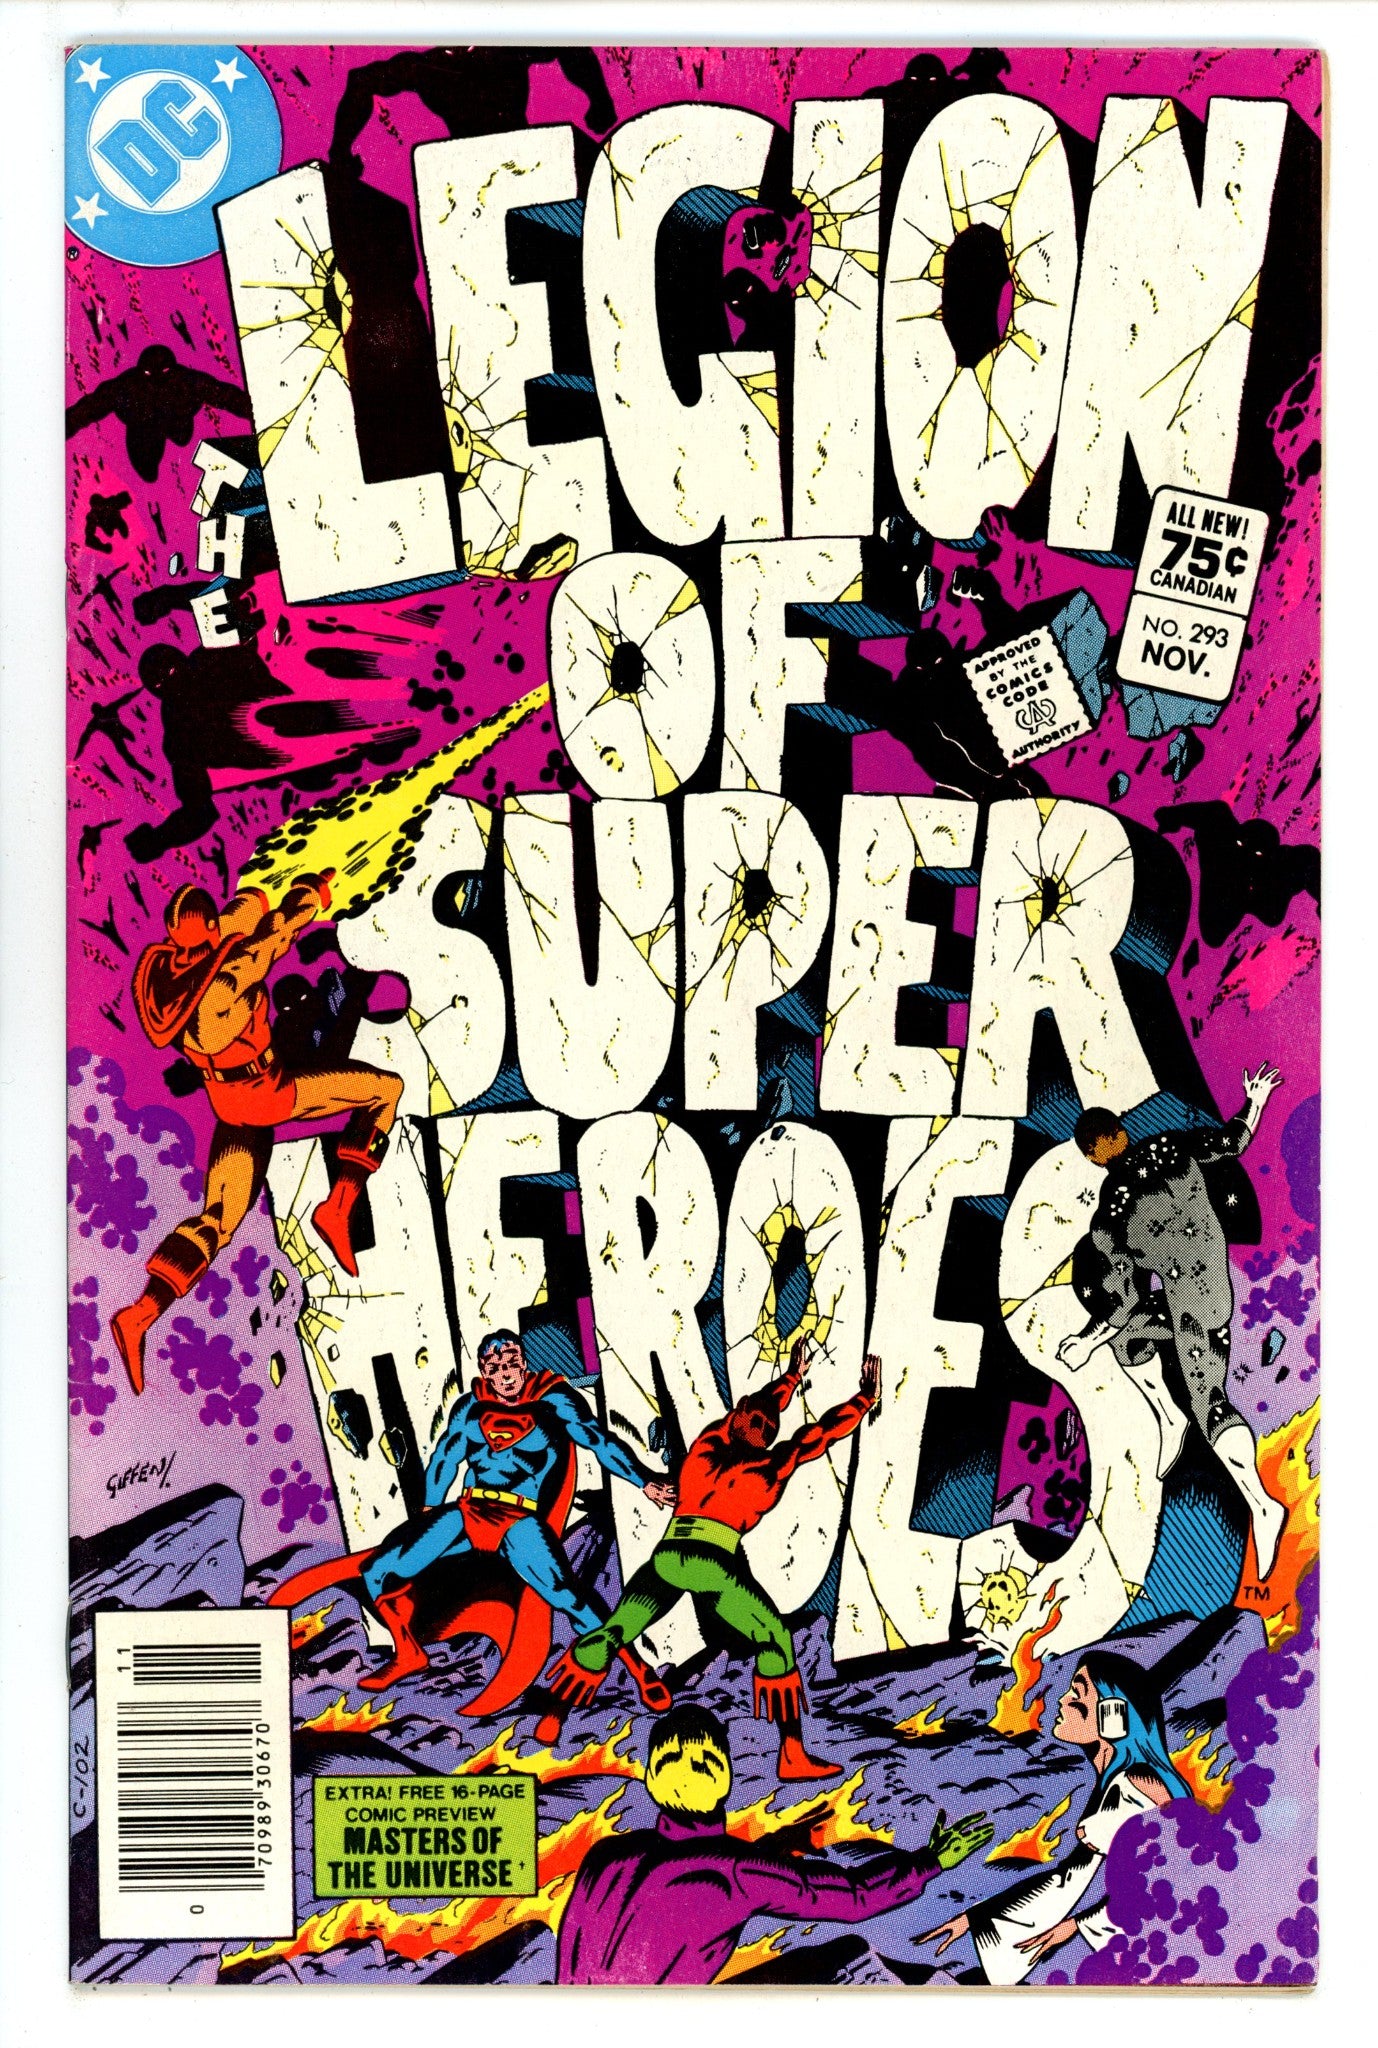 The Legion of Super-Heroes Vol 2 293 VF- (7.5) (1982) Canadian Price Variant 